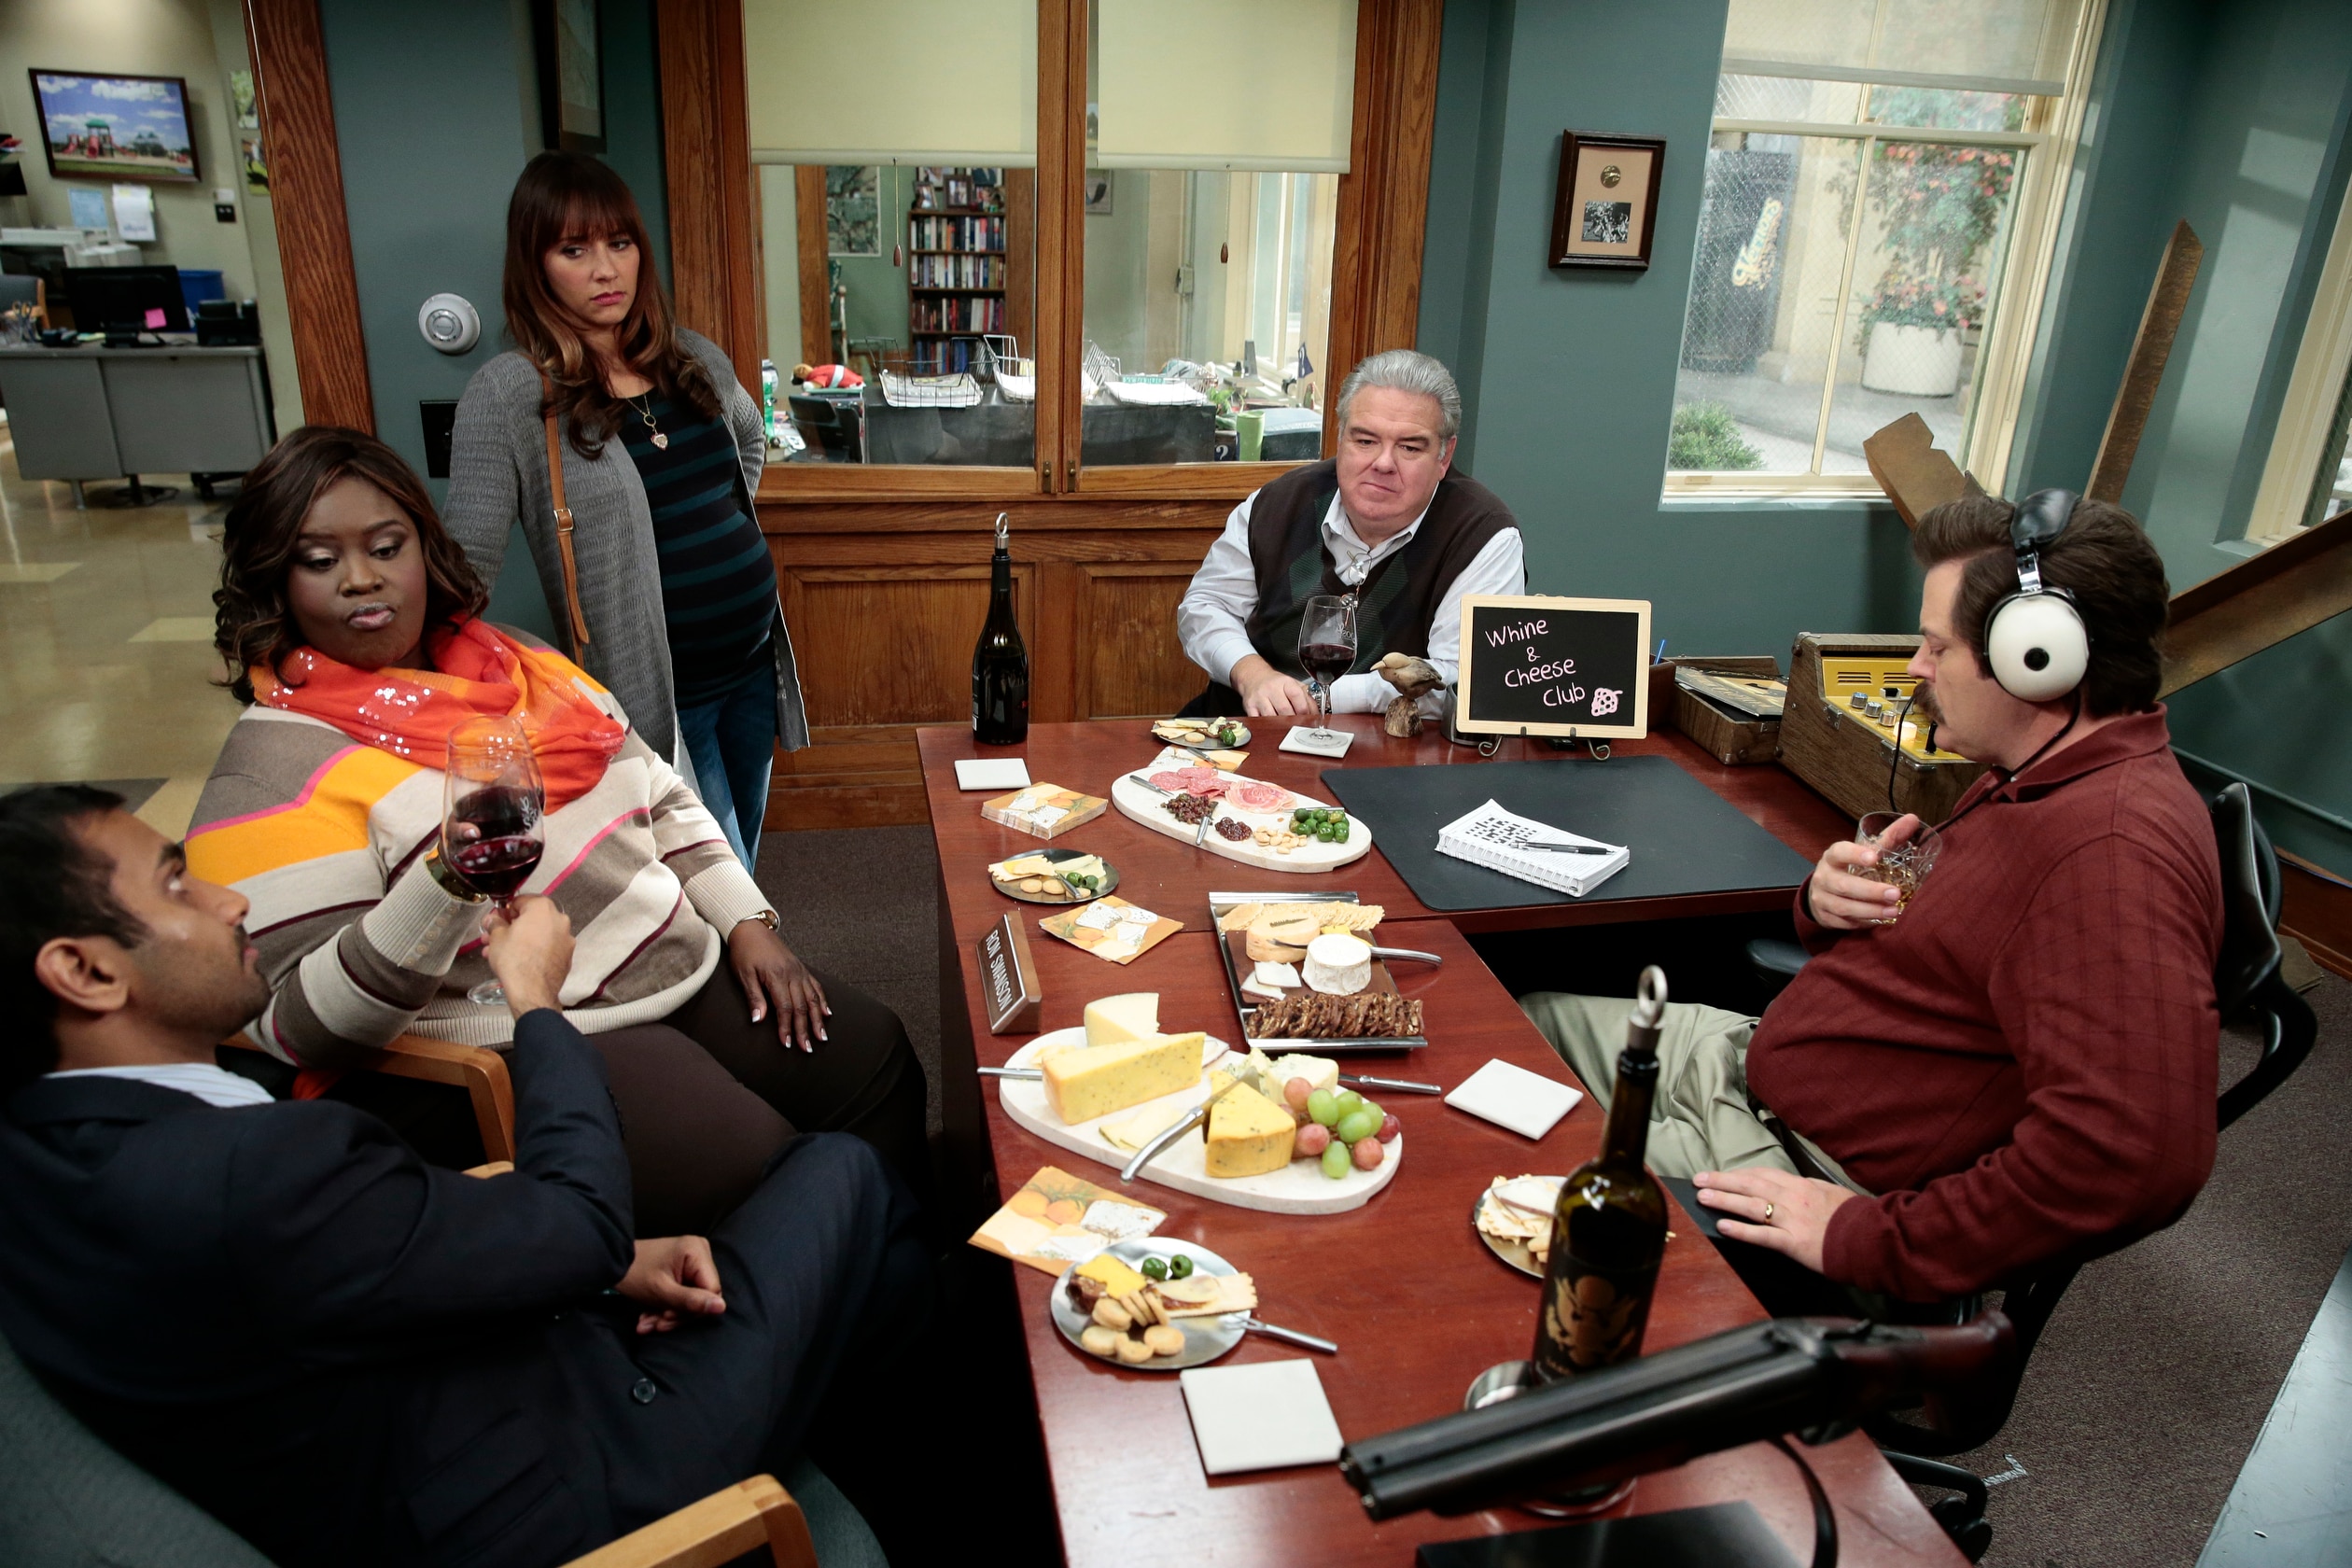 Parks and Recreation: The Rules of Whine & Cheese Club Photo: 1511476 - NBC.com2520 x 1680